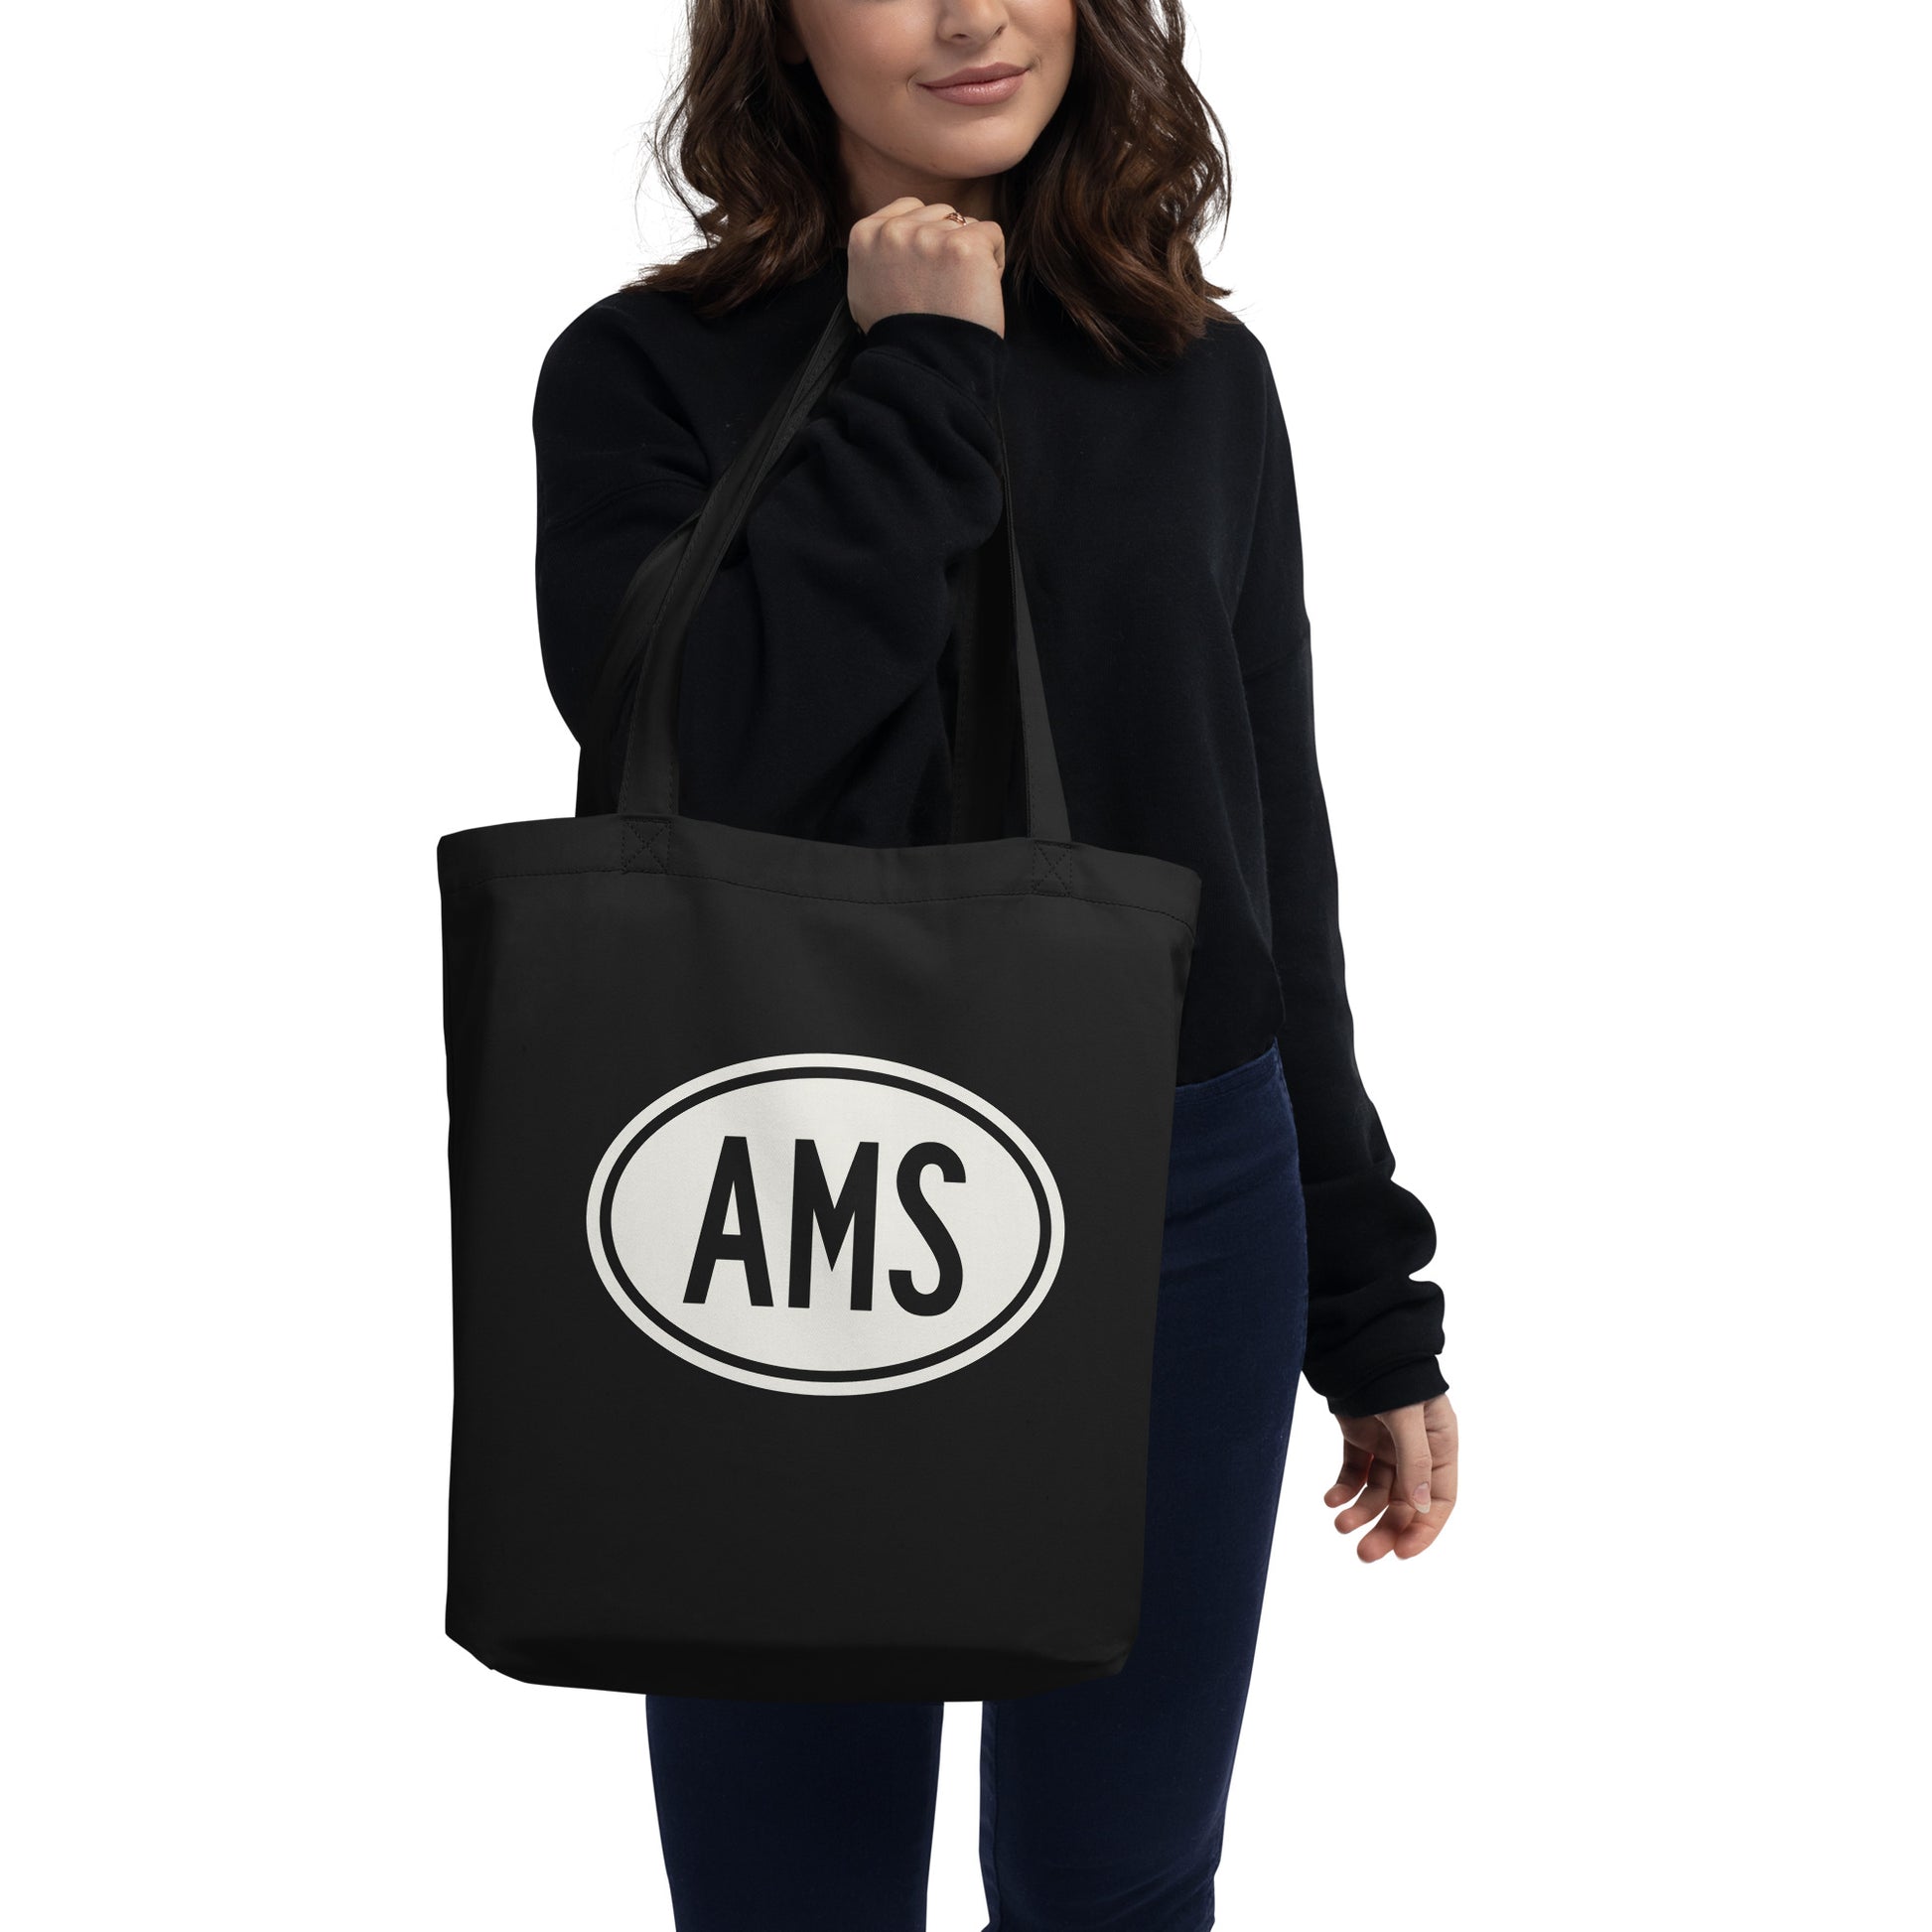 Unique Travel Gift Organic Tote - White Oval • AMS Amsterdam • YHM Designs - Image 03